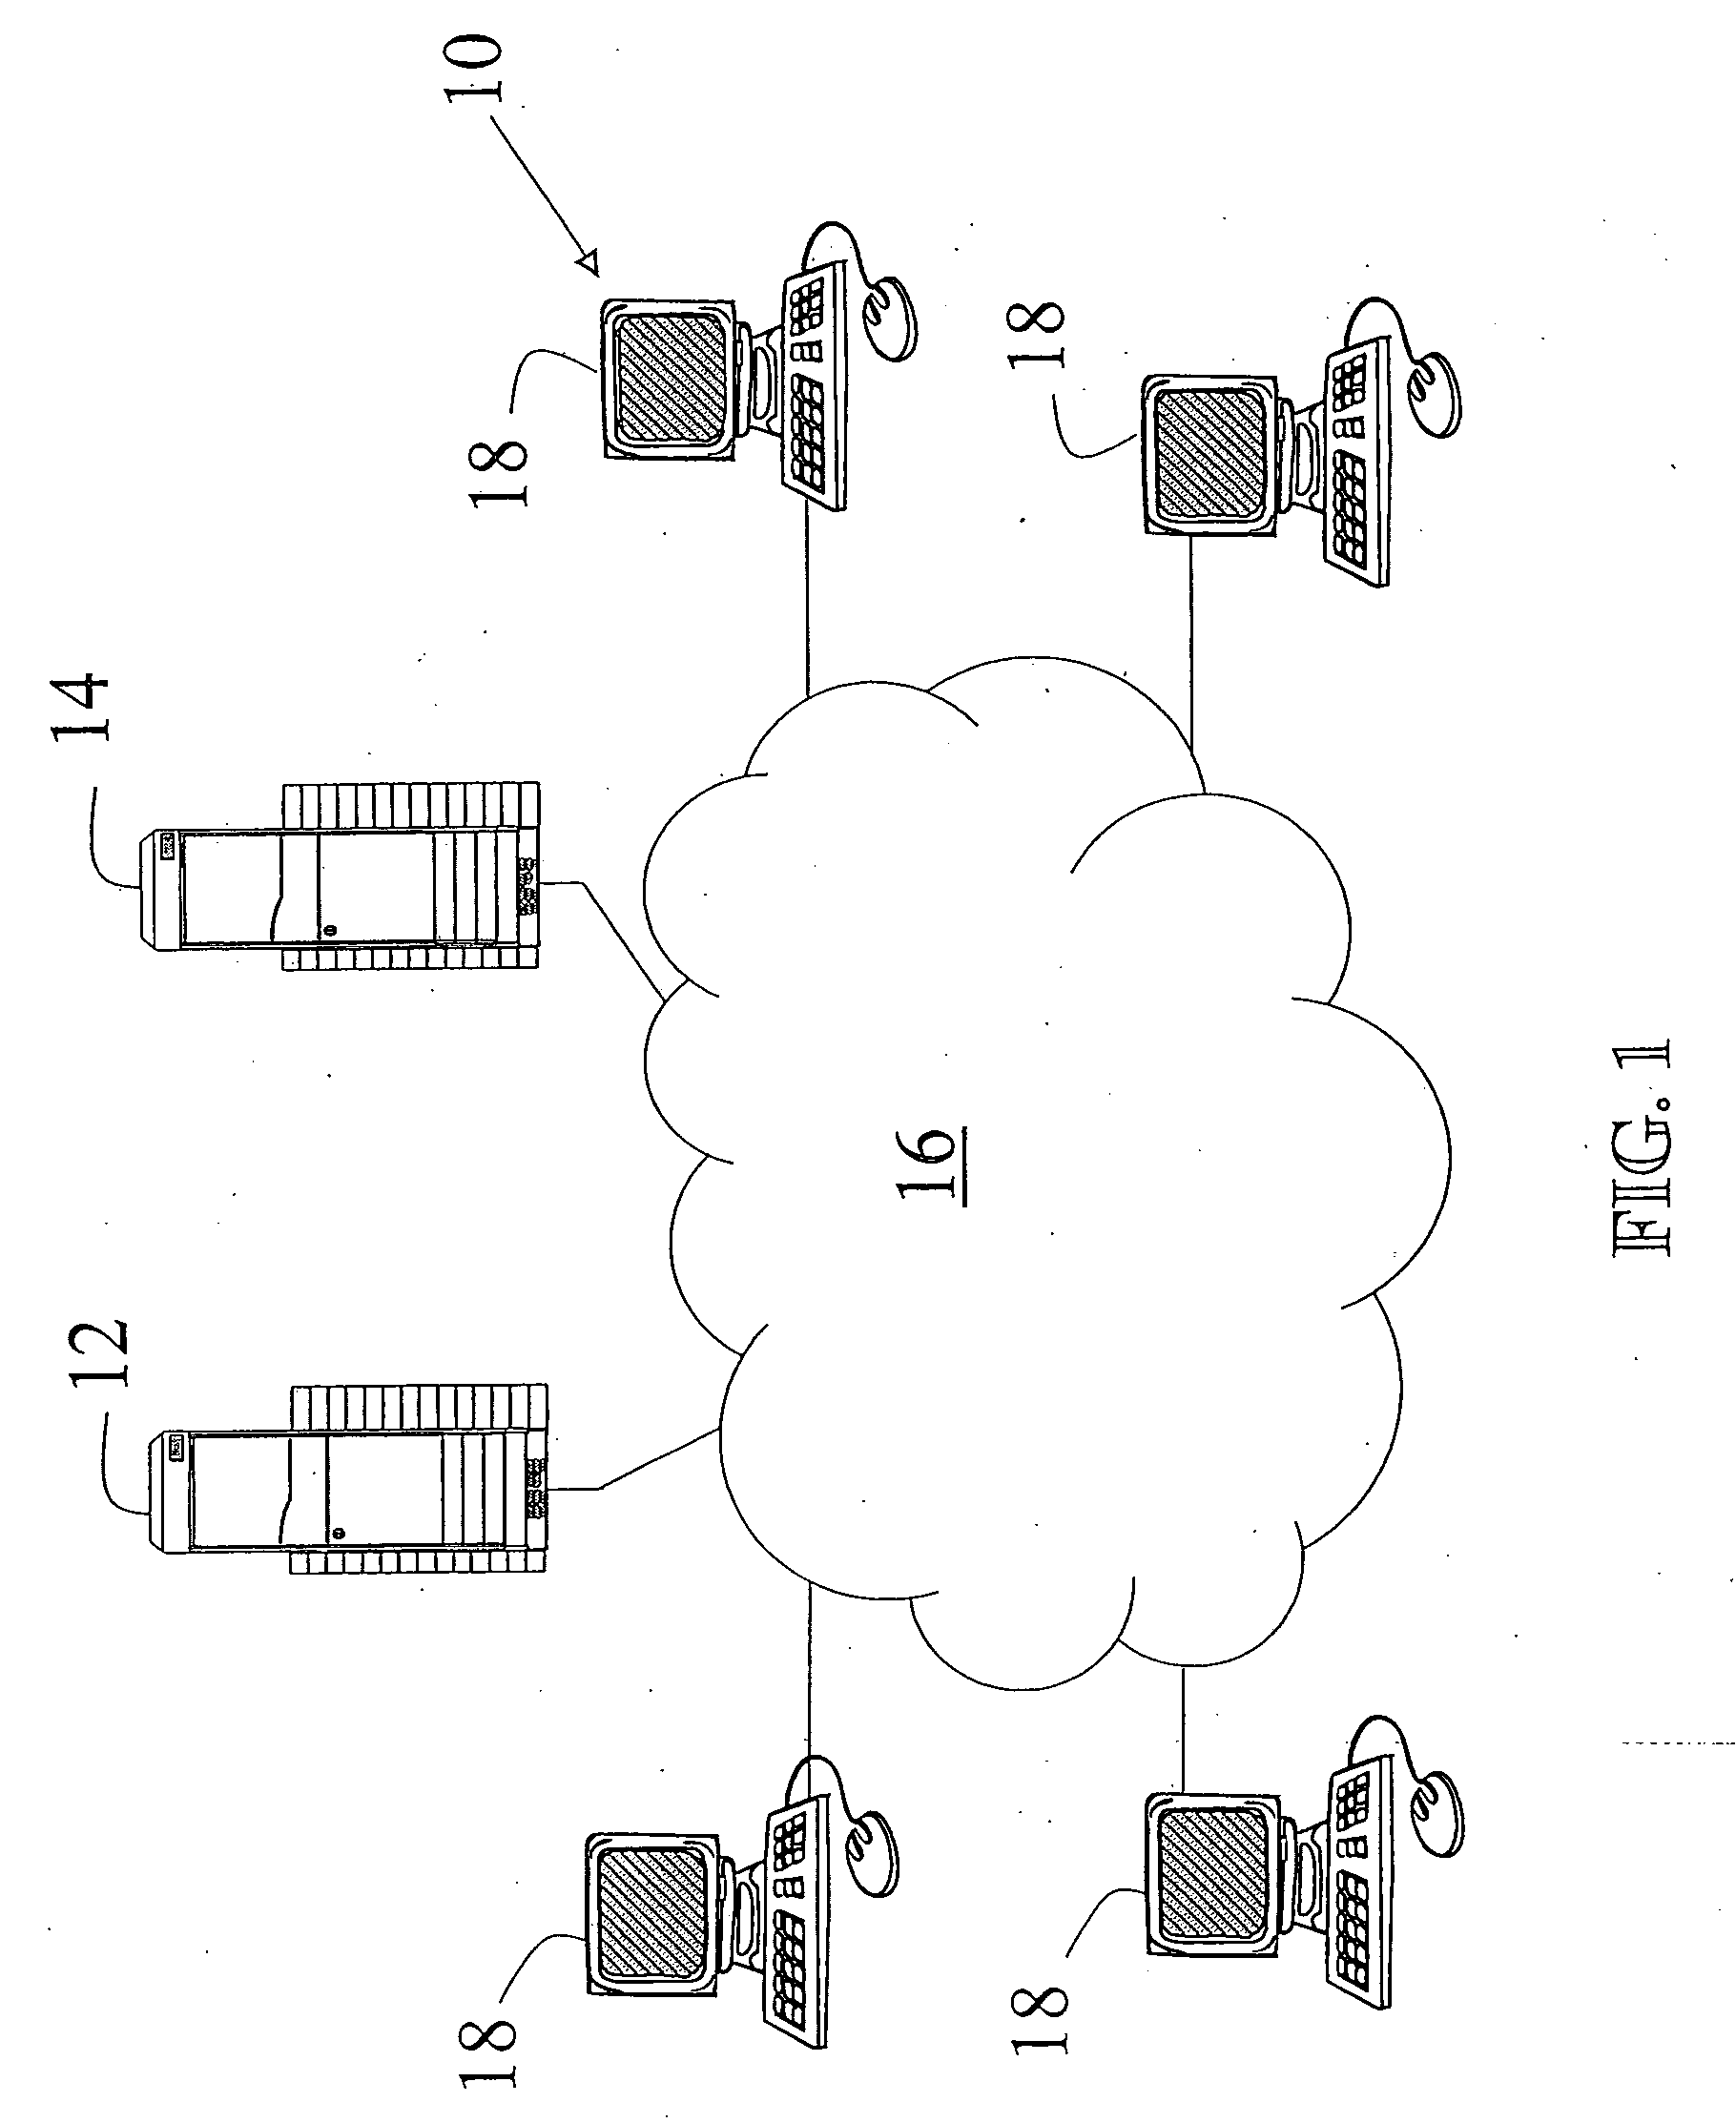 Apparatus and method for analyzing trends with values of interest